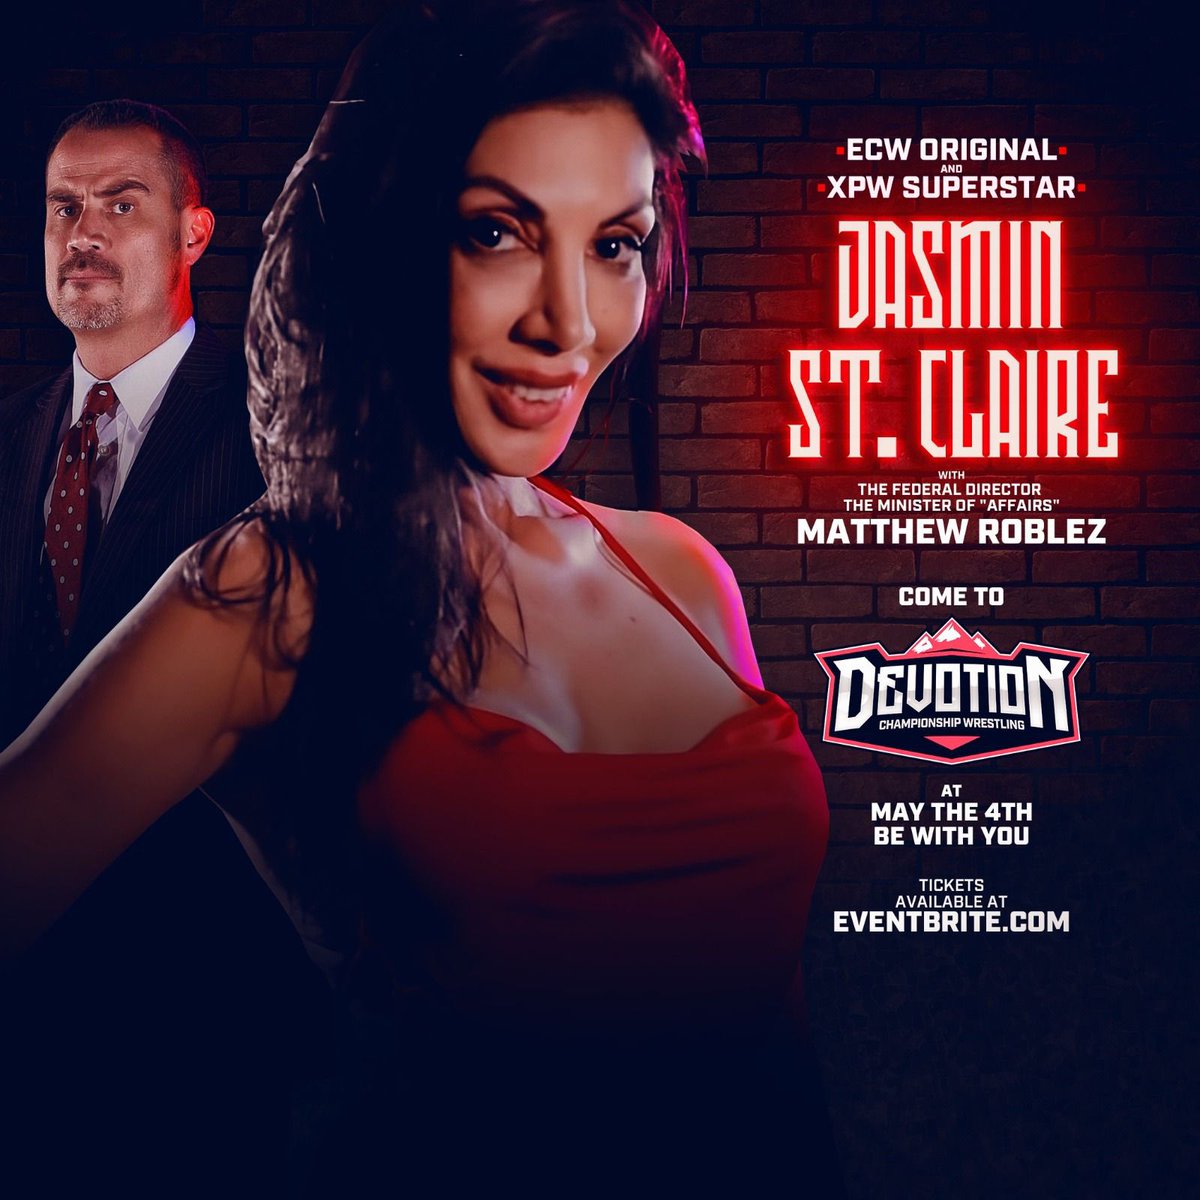 🚨Breaking News!🚨 ECW Original and XPW Superstar Jasmin St Claire comes to Utah for the first time EXCLUSIVELY to Devotion Championship Wrestling with The Federal Director Matthew Roblez at May the 4th be with you! 🎟️: eventbrite.com/e/may-the-4th-…